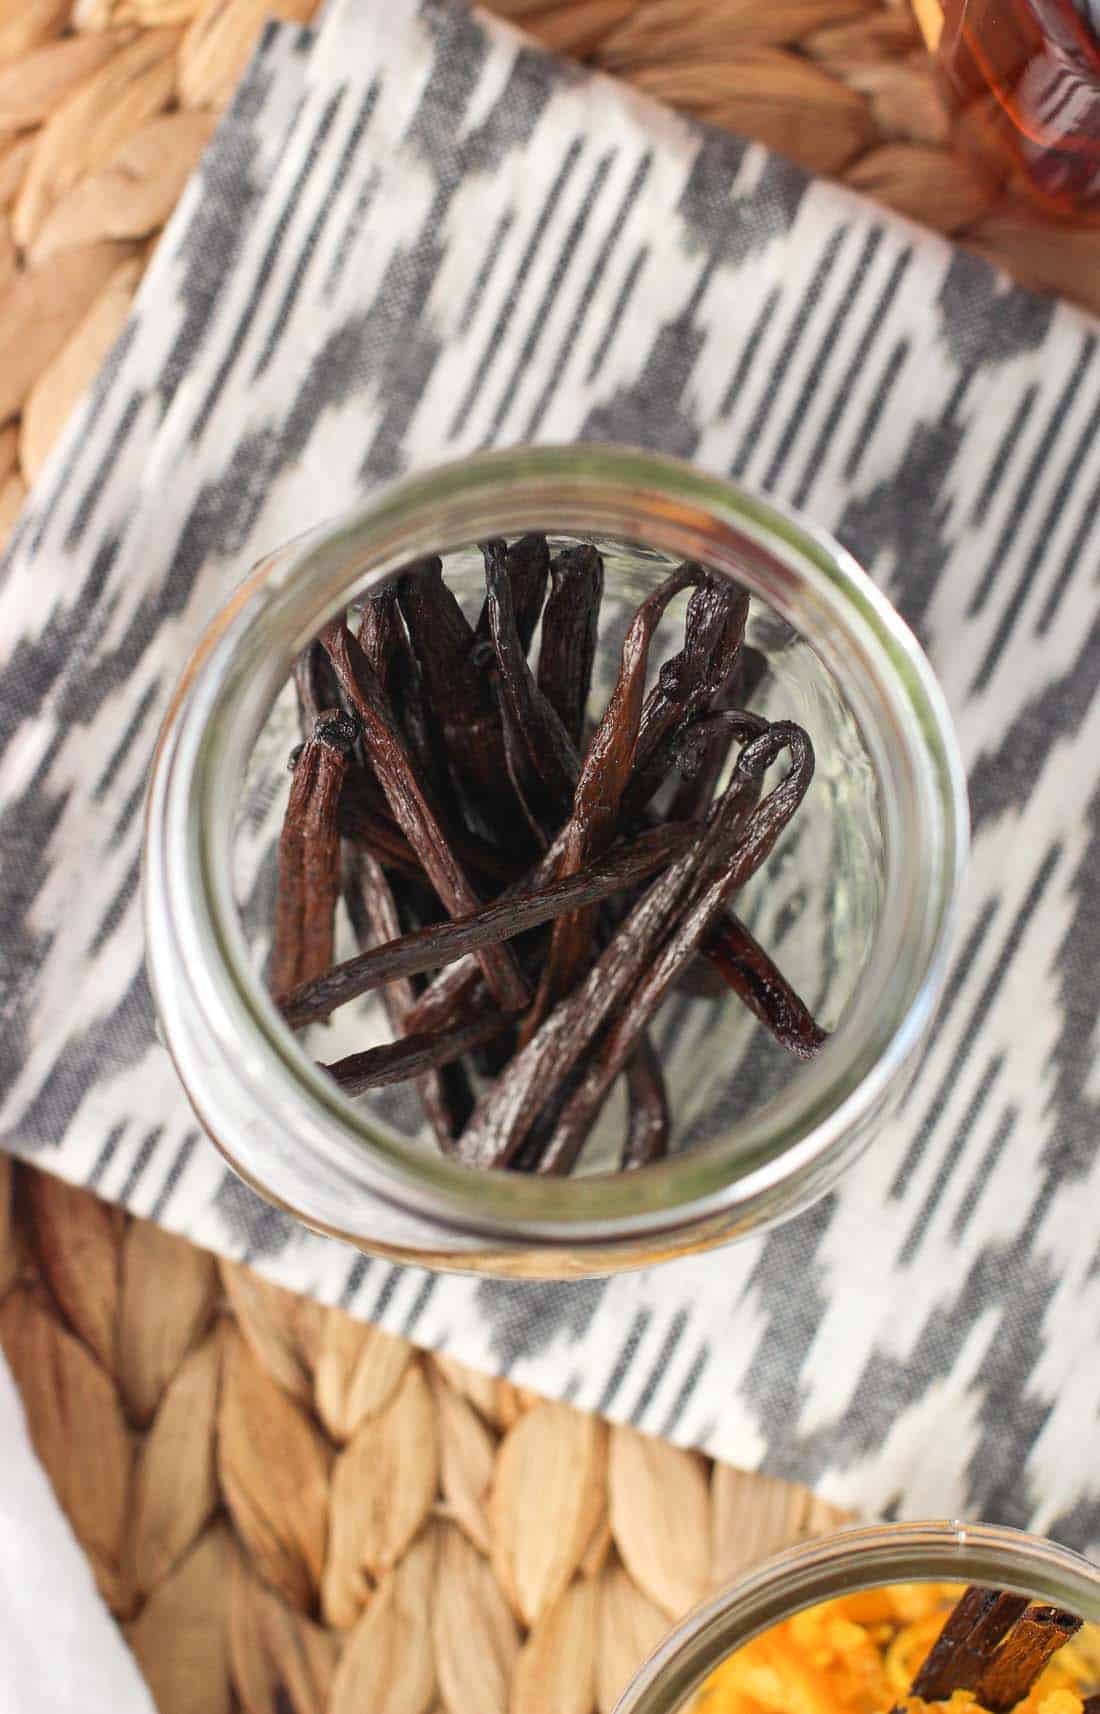 Whole vanilla beans in a large glass jar.